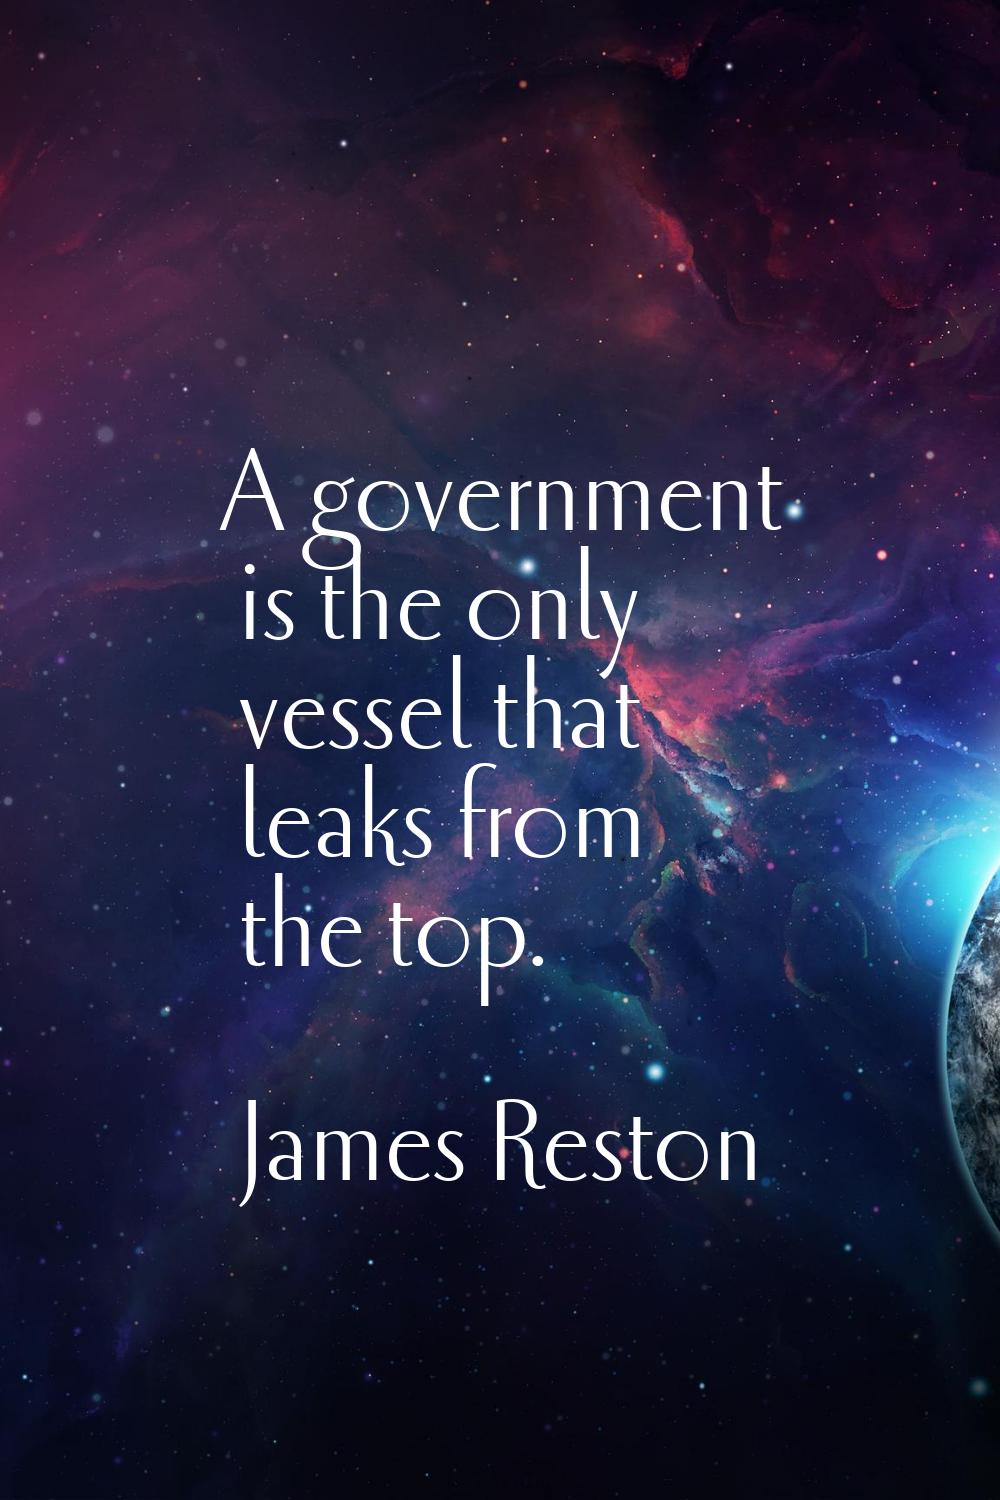 A government is the only vessel that leaks from the top.